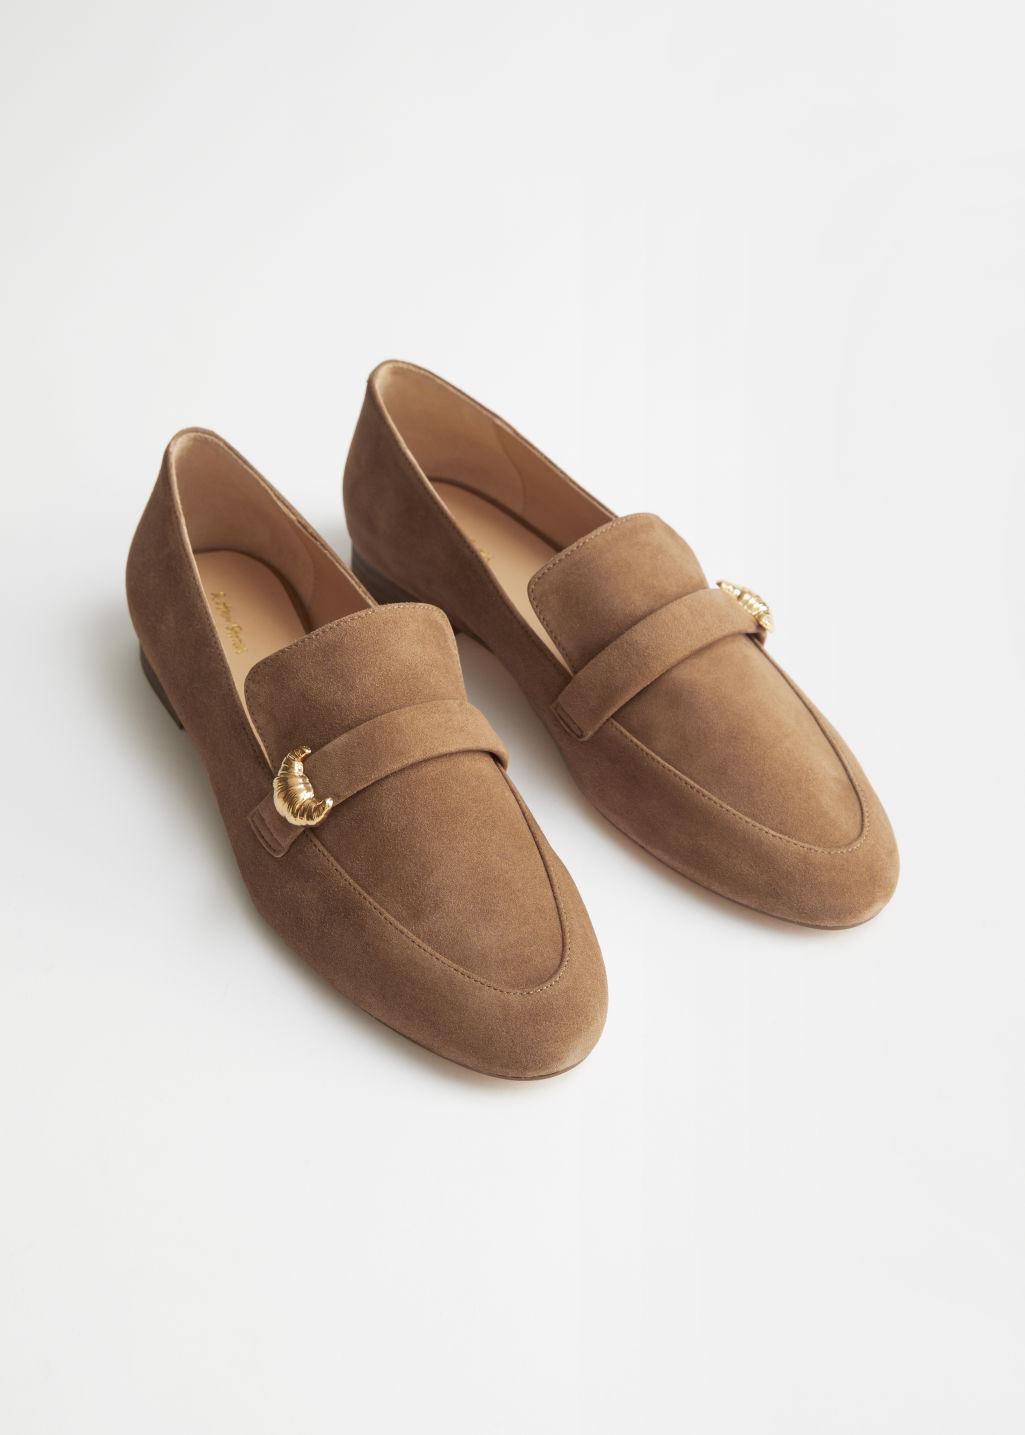 & Other Stories Suede Croissant Pendant Loafers in Brown